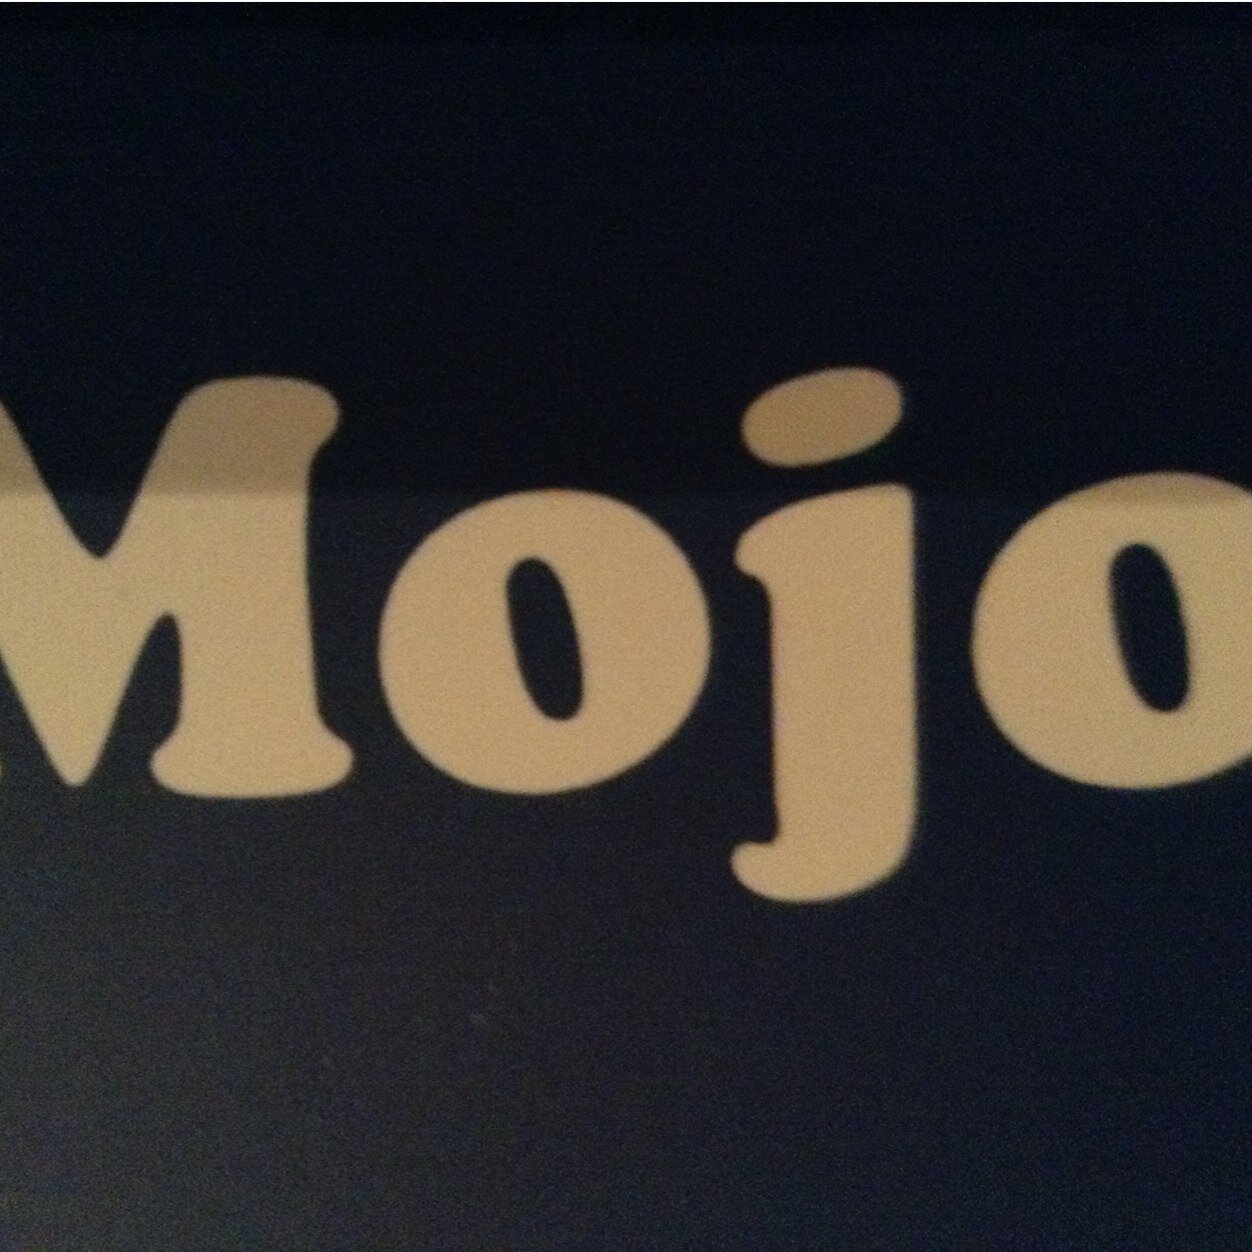 Mojo social, Mojo Work's (business) and Mojo Holiday's come have some fun with us.